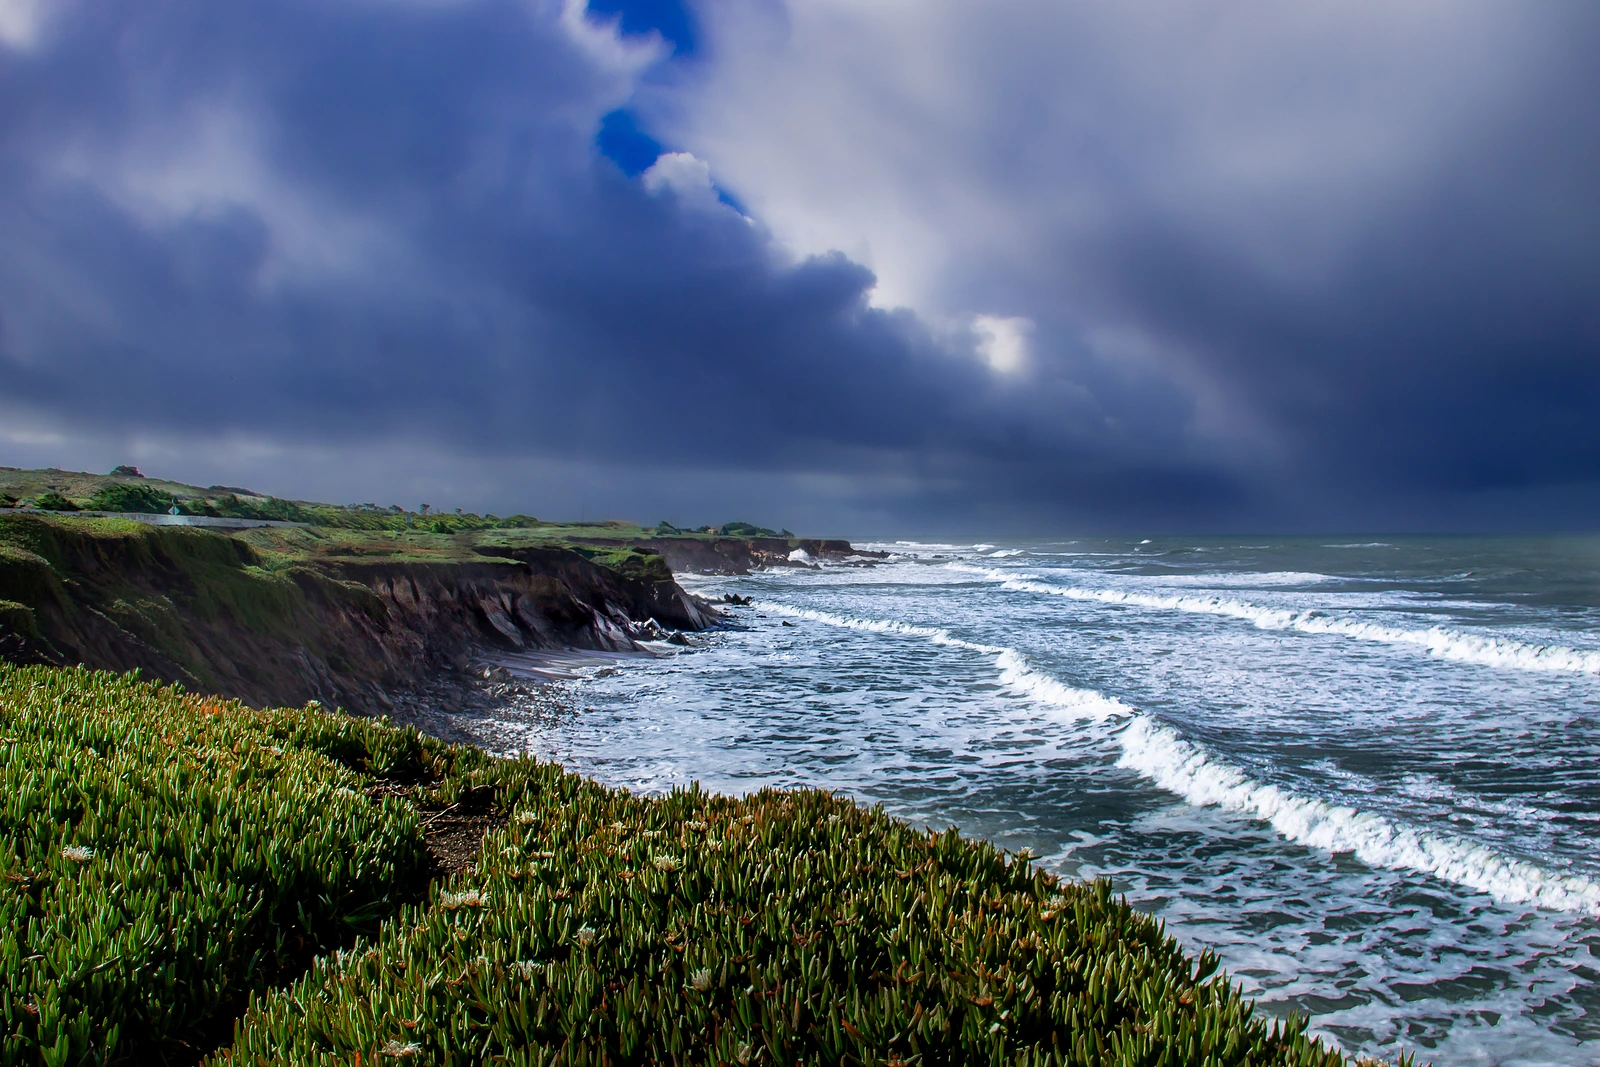 Storm at Pescadero. Clouds always make a better capture.